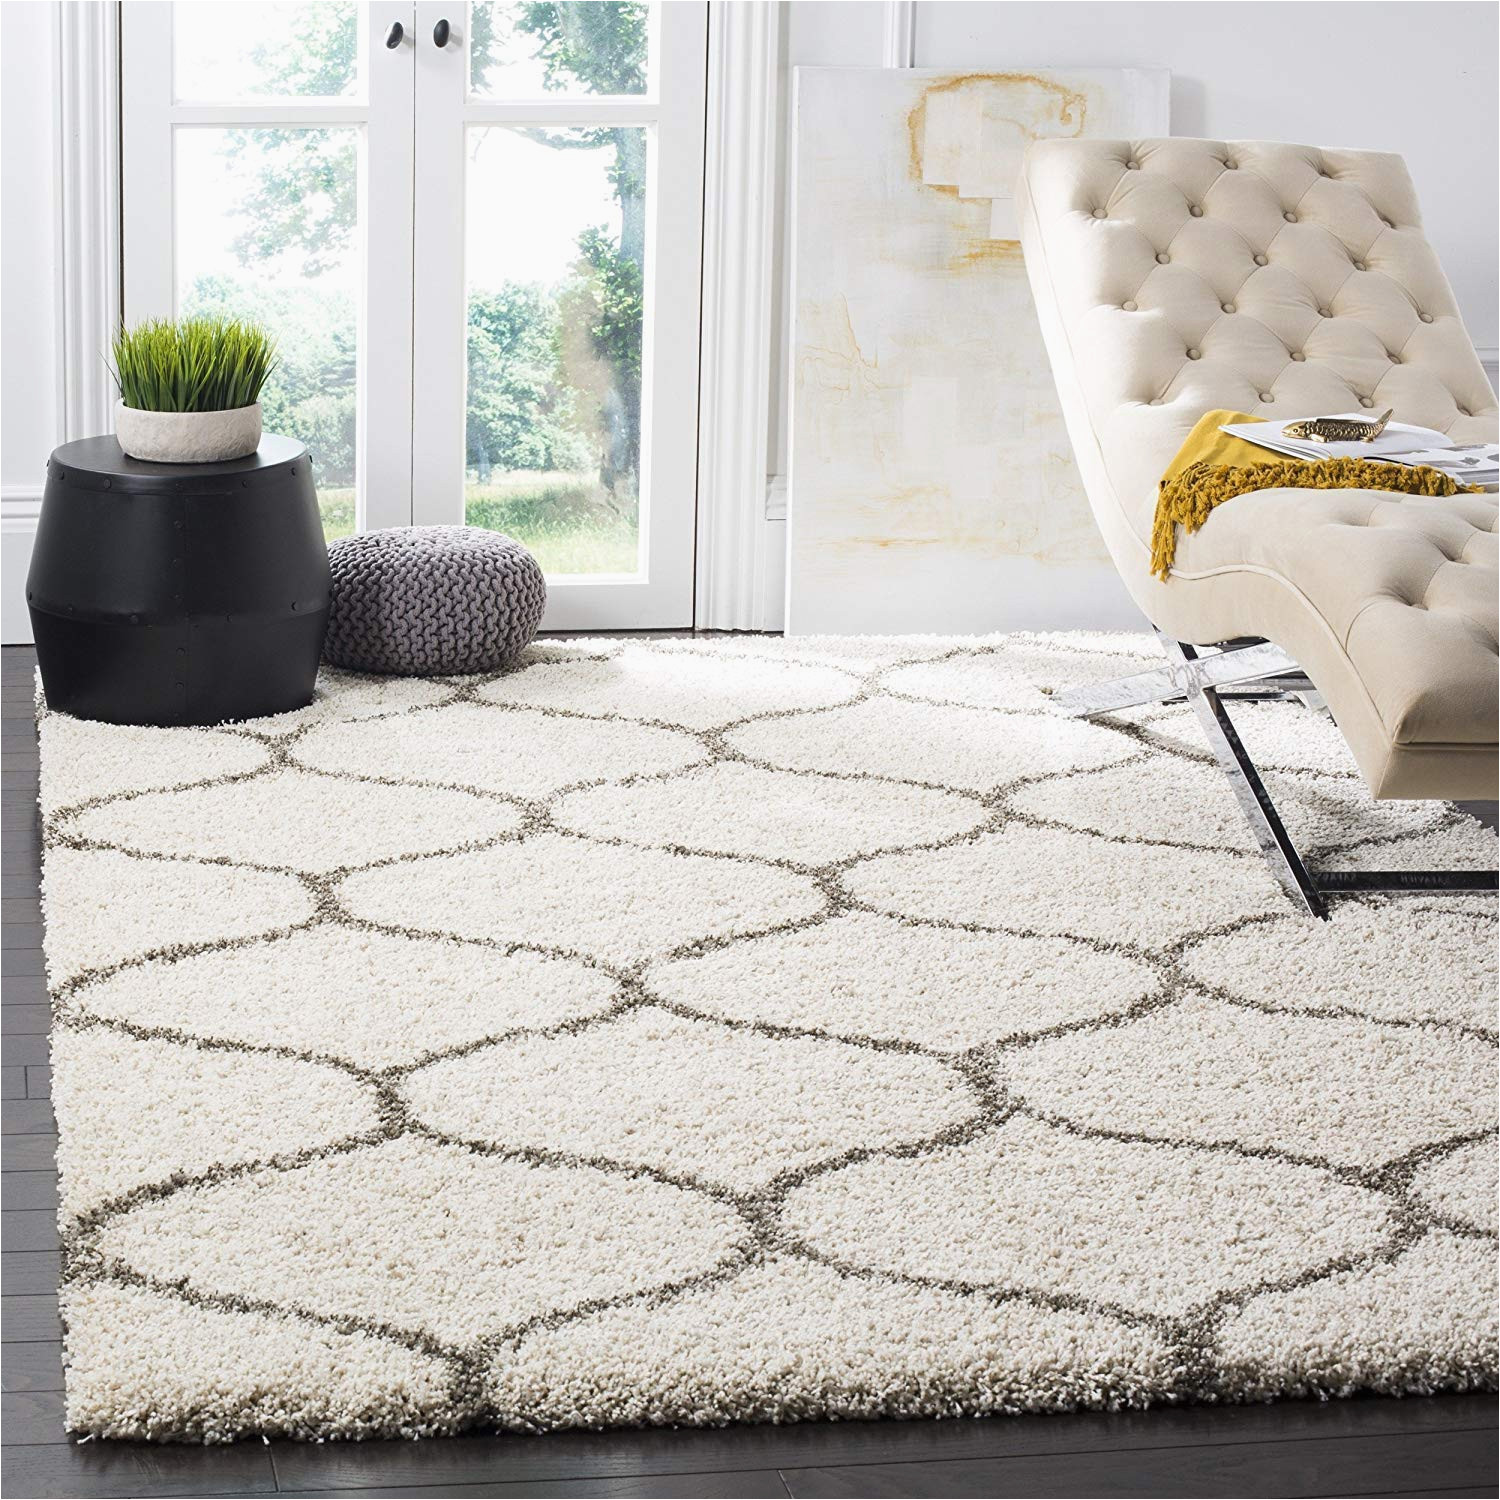 Best Place to Buy area Rugs In atlanta Global Home Carpet Shag Collection Moroccan Diamond Trellis Modern area Rug Carpet 2×5 Feet Runner Ivory & Grey.